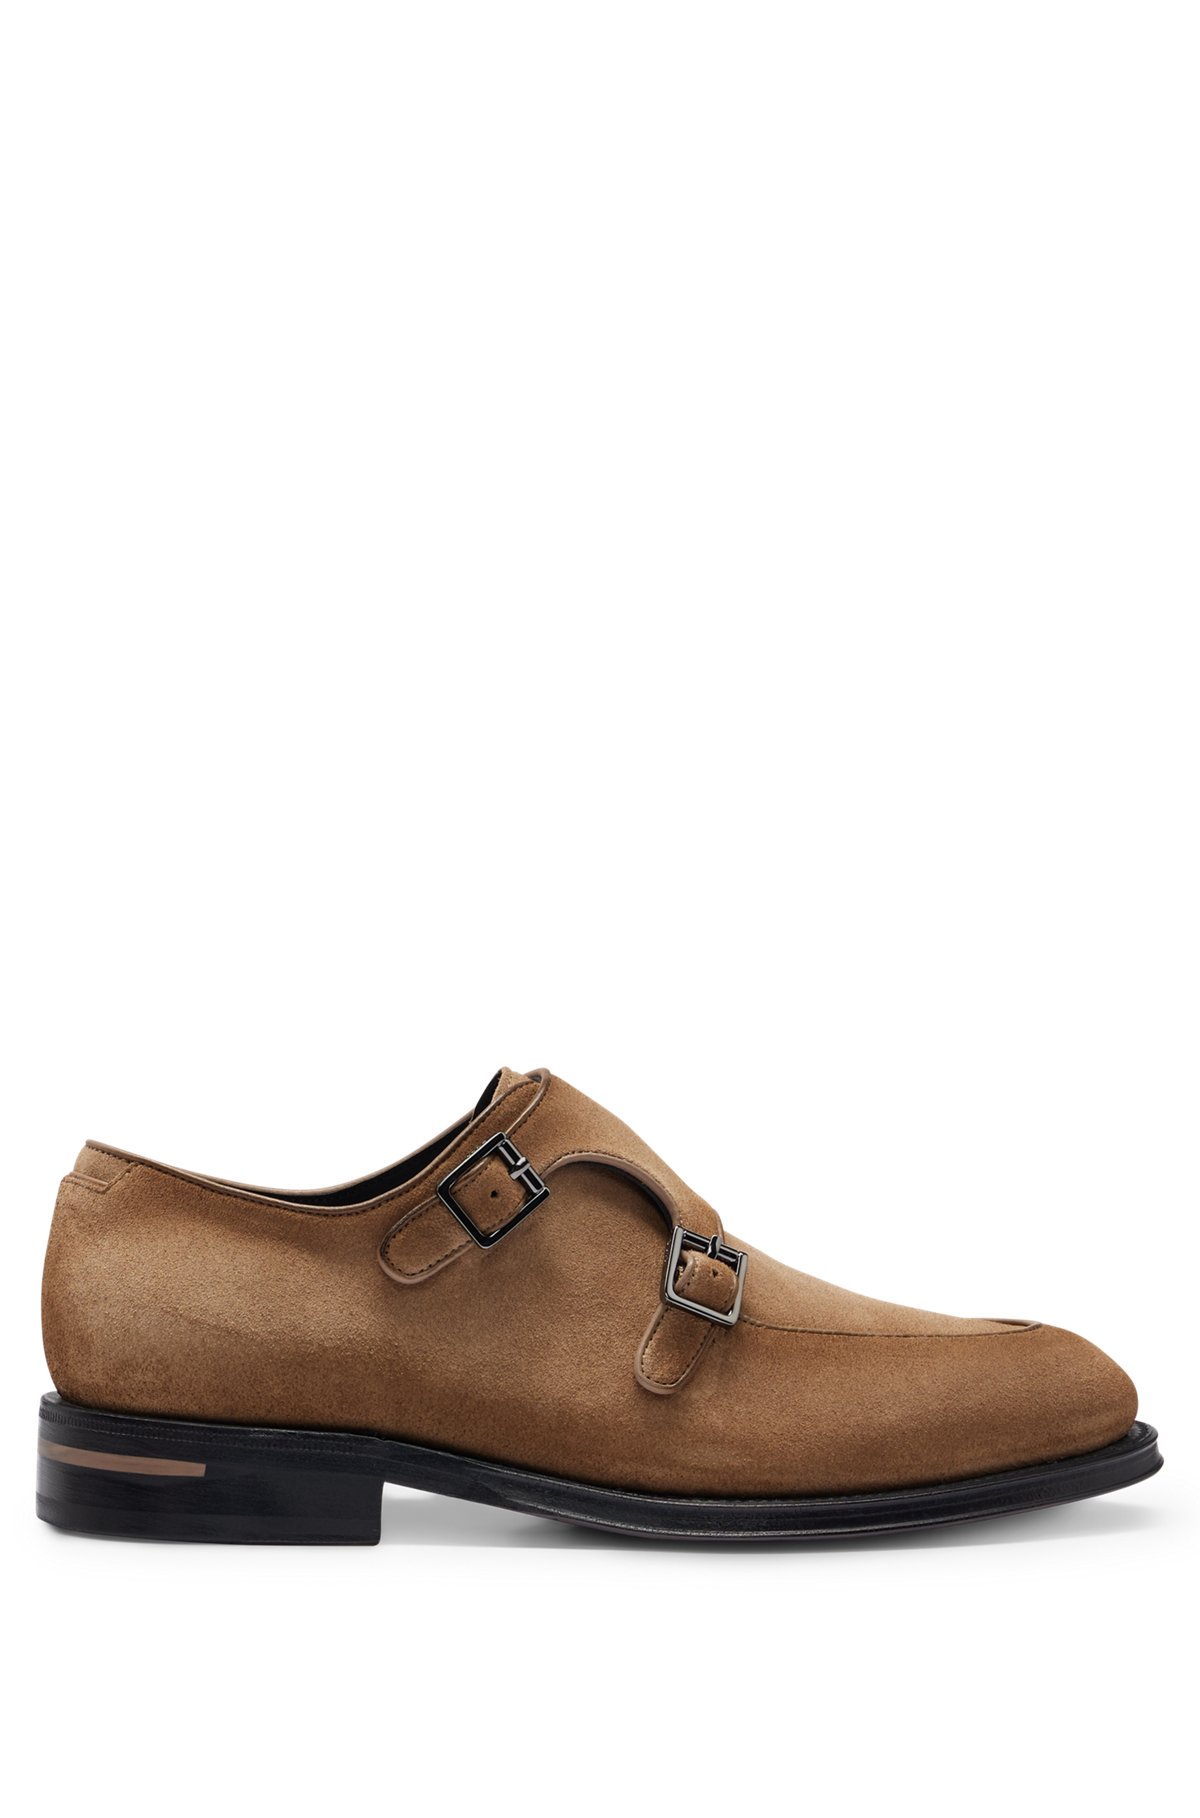 Shaded-suede double-monk shoes with branded buckles, Beige